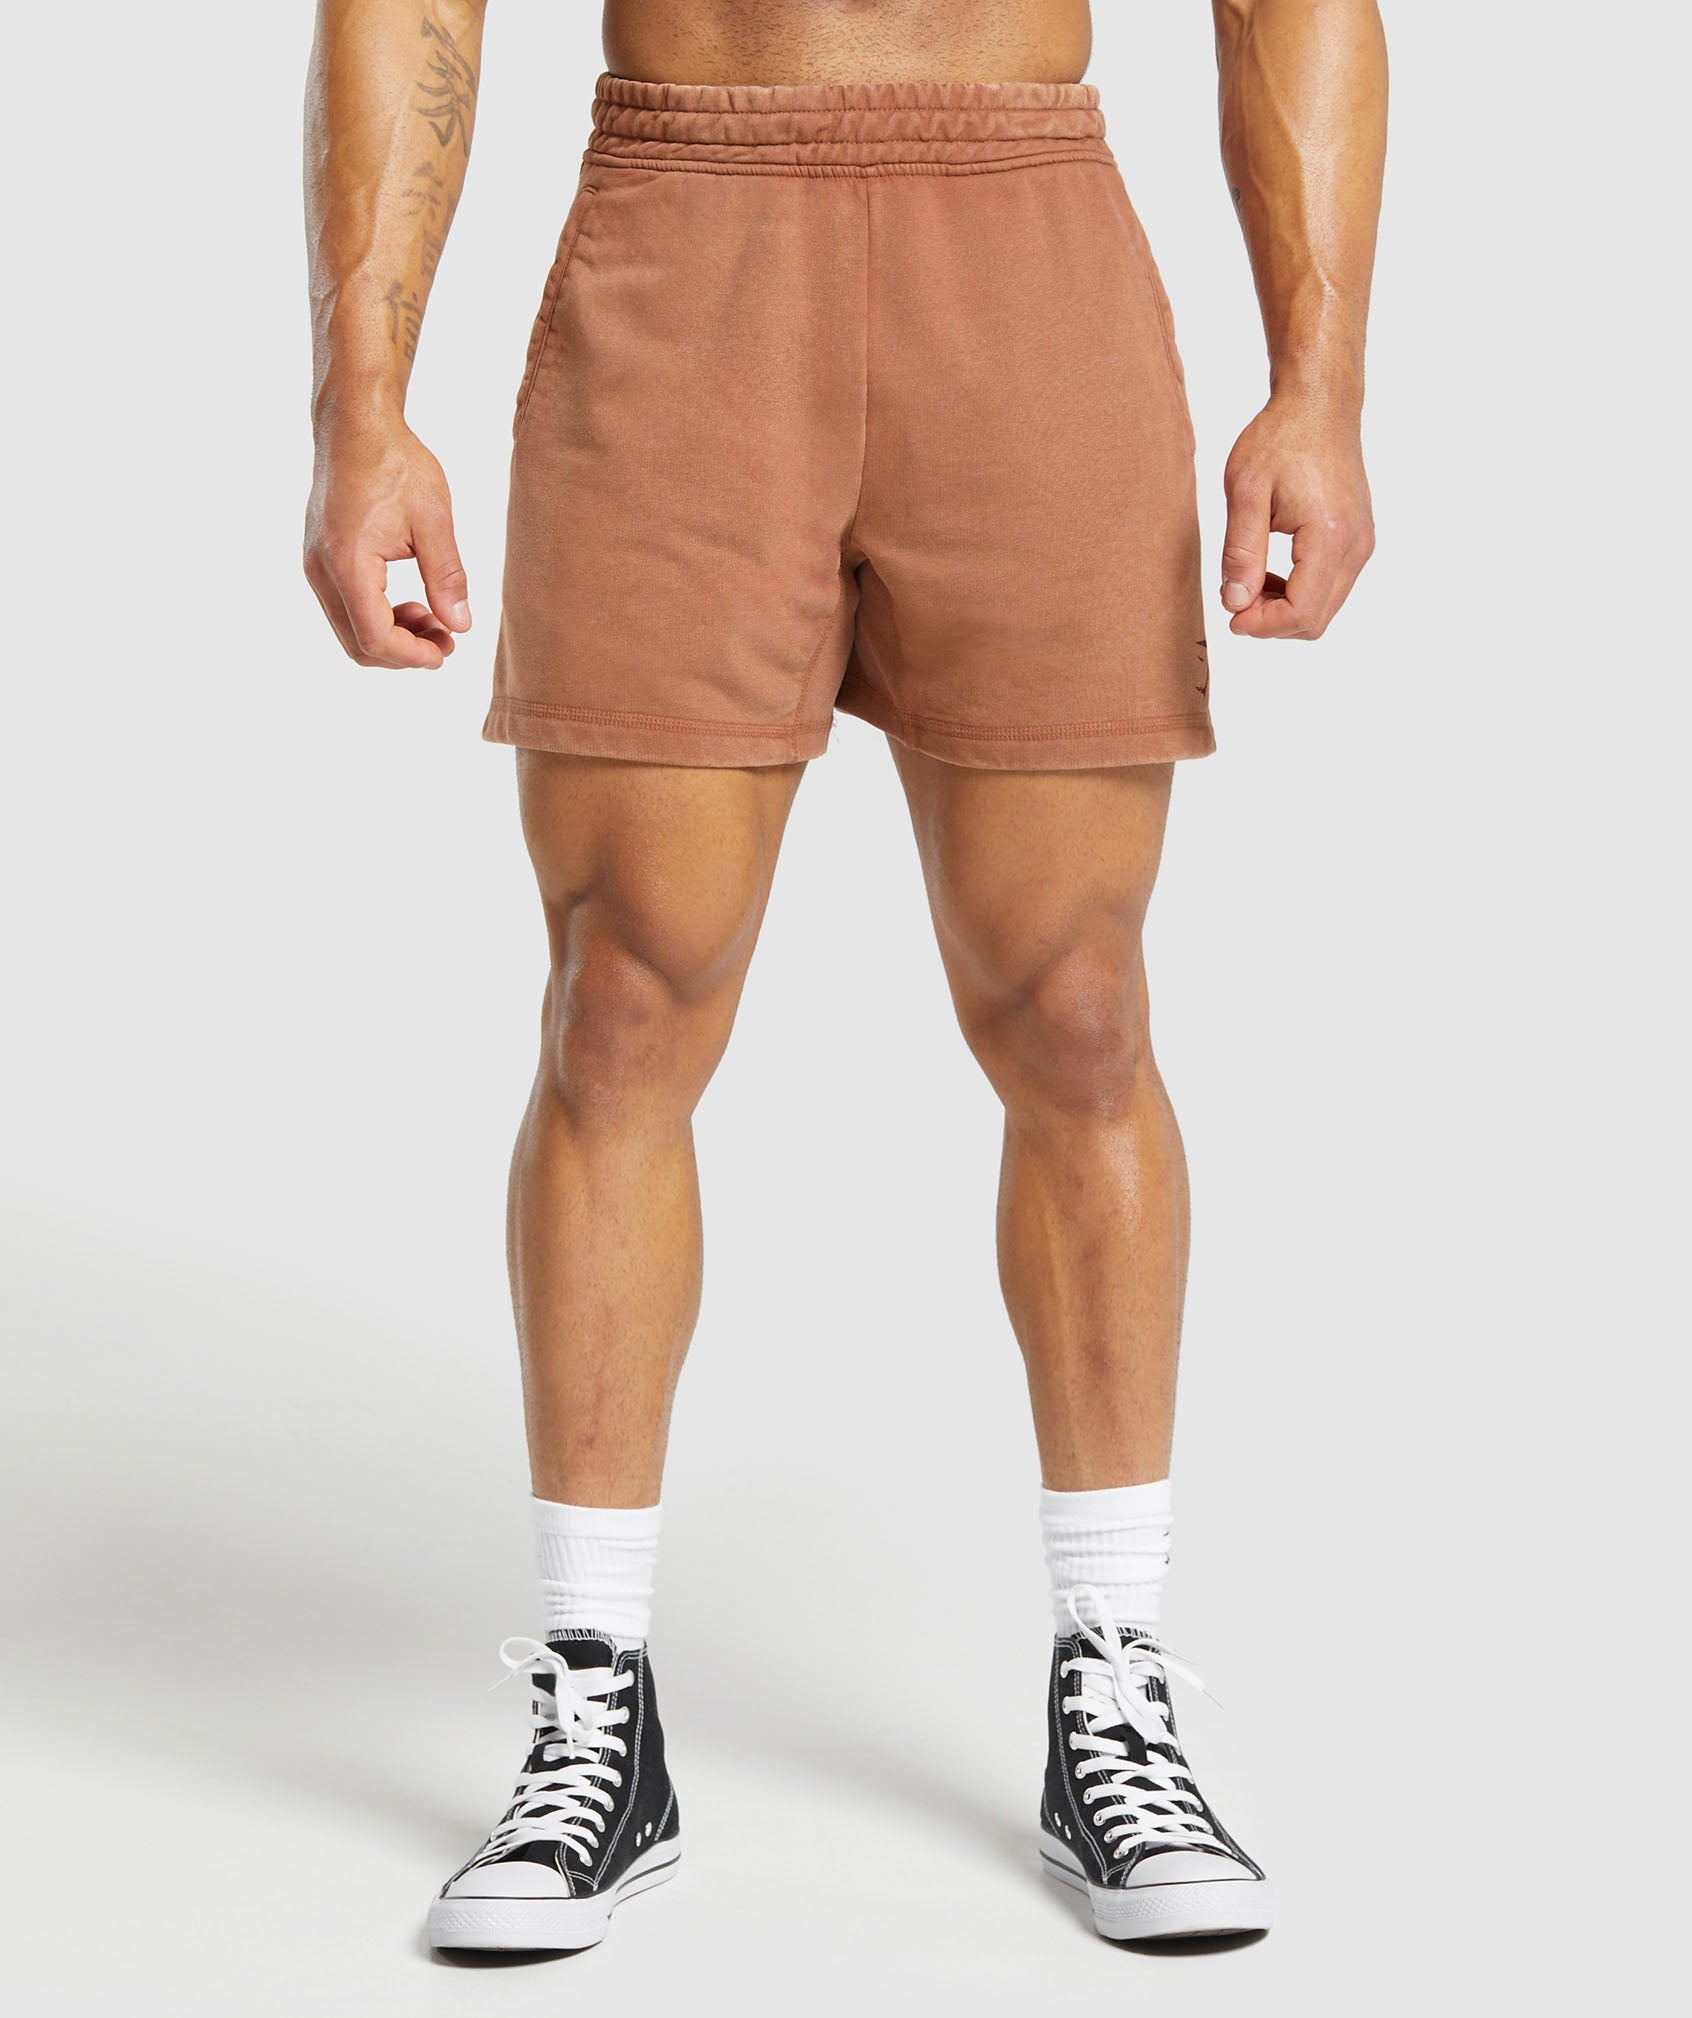 Heritage 5" Short in Canyon Brown